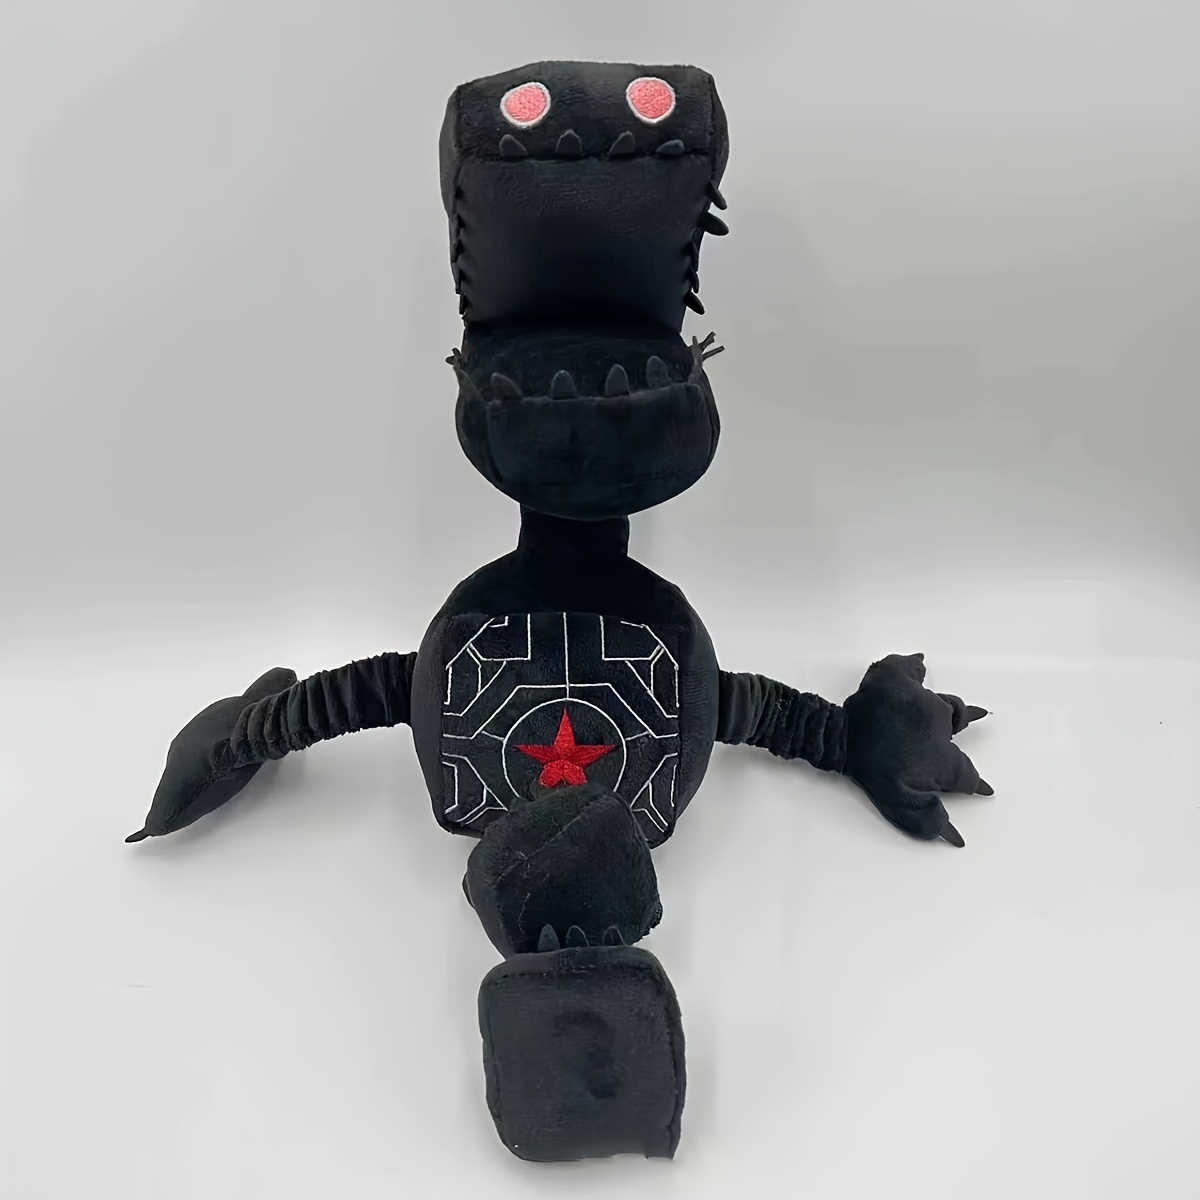  Doors Plush - 8 Window Plushies Toy for Fans Gift, 2022 New  Monster Horror Game Stuffed Figure Doll for Kids and Adults, Halloween  Christmas Birthday Choice for Boys Girls : Toys